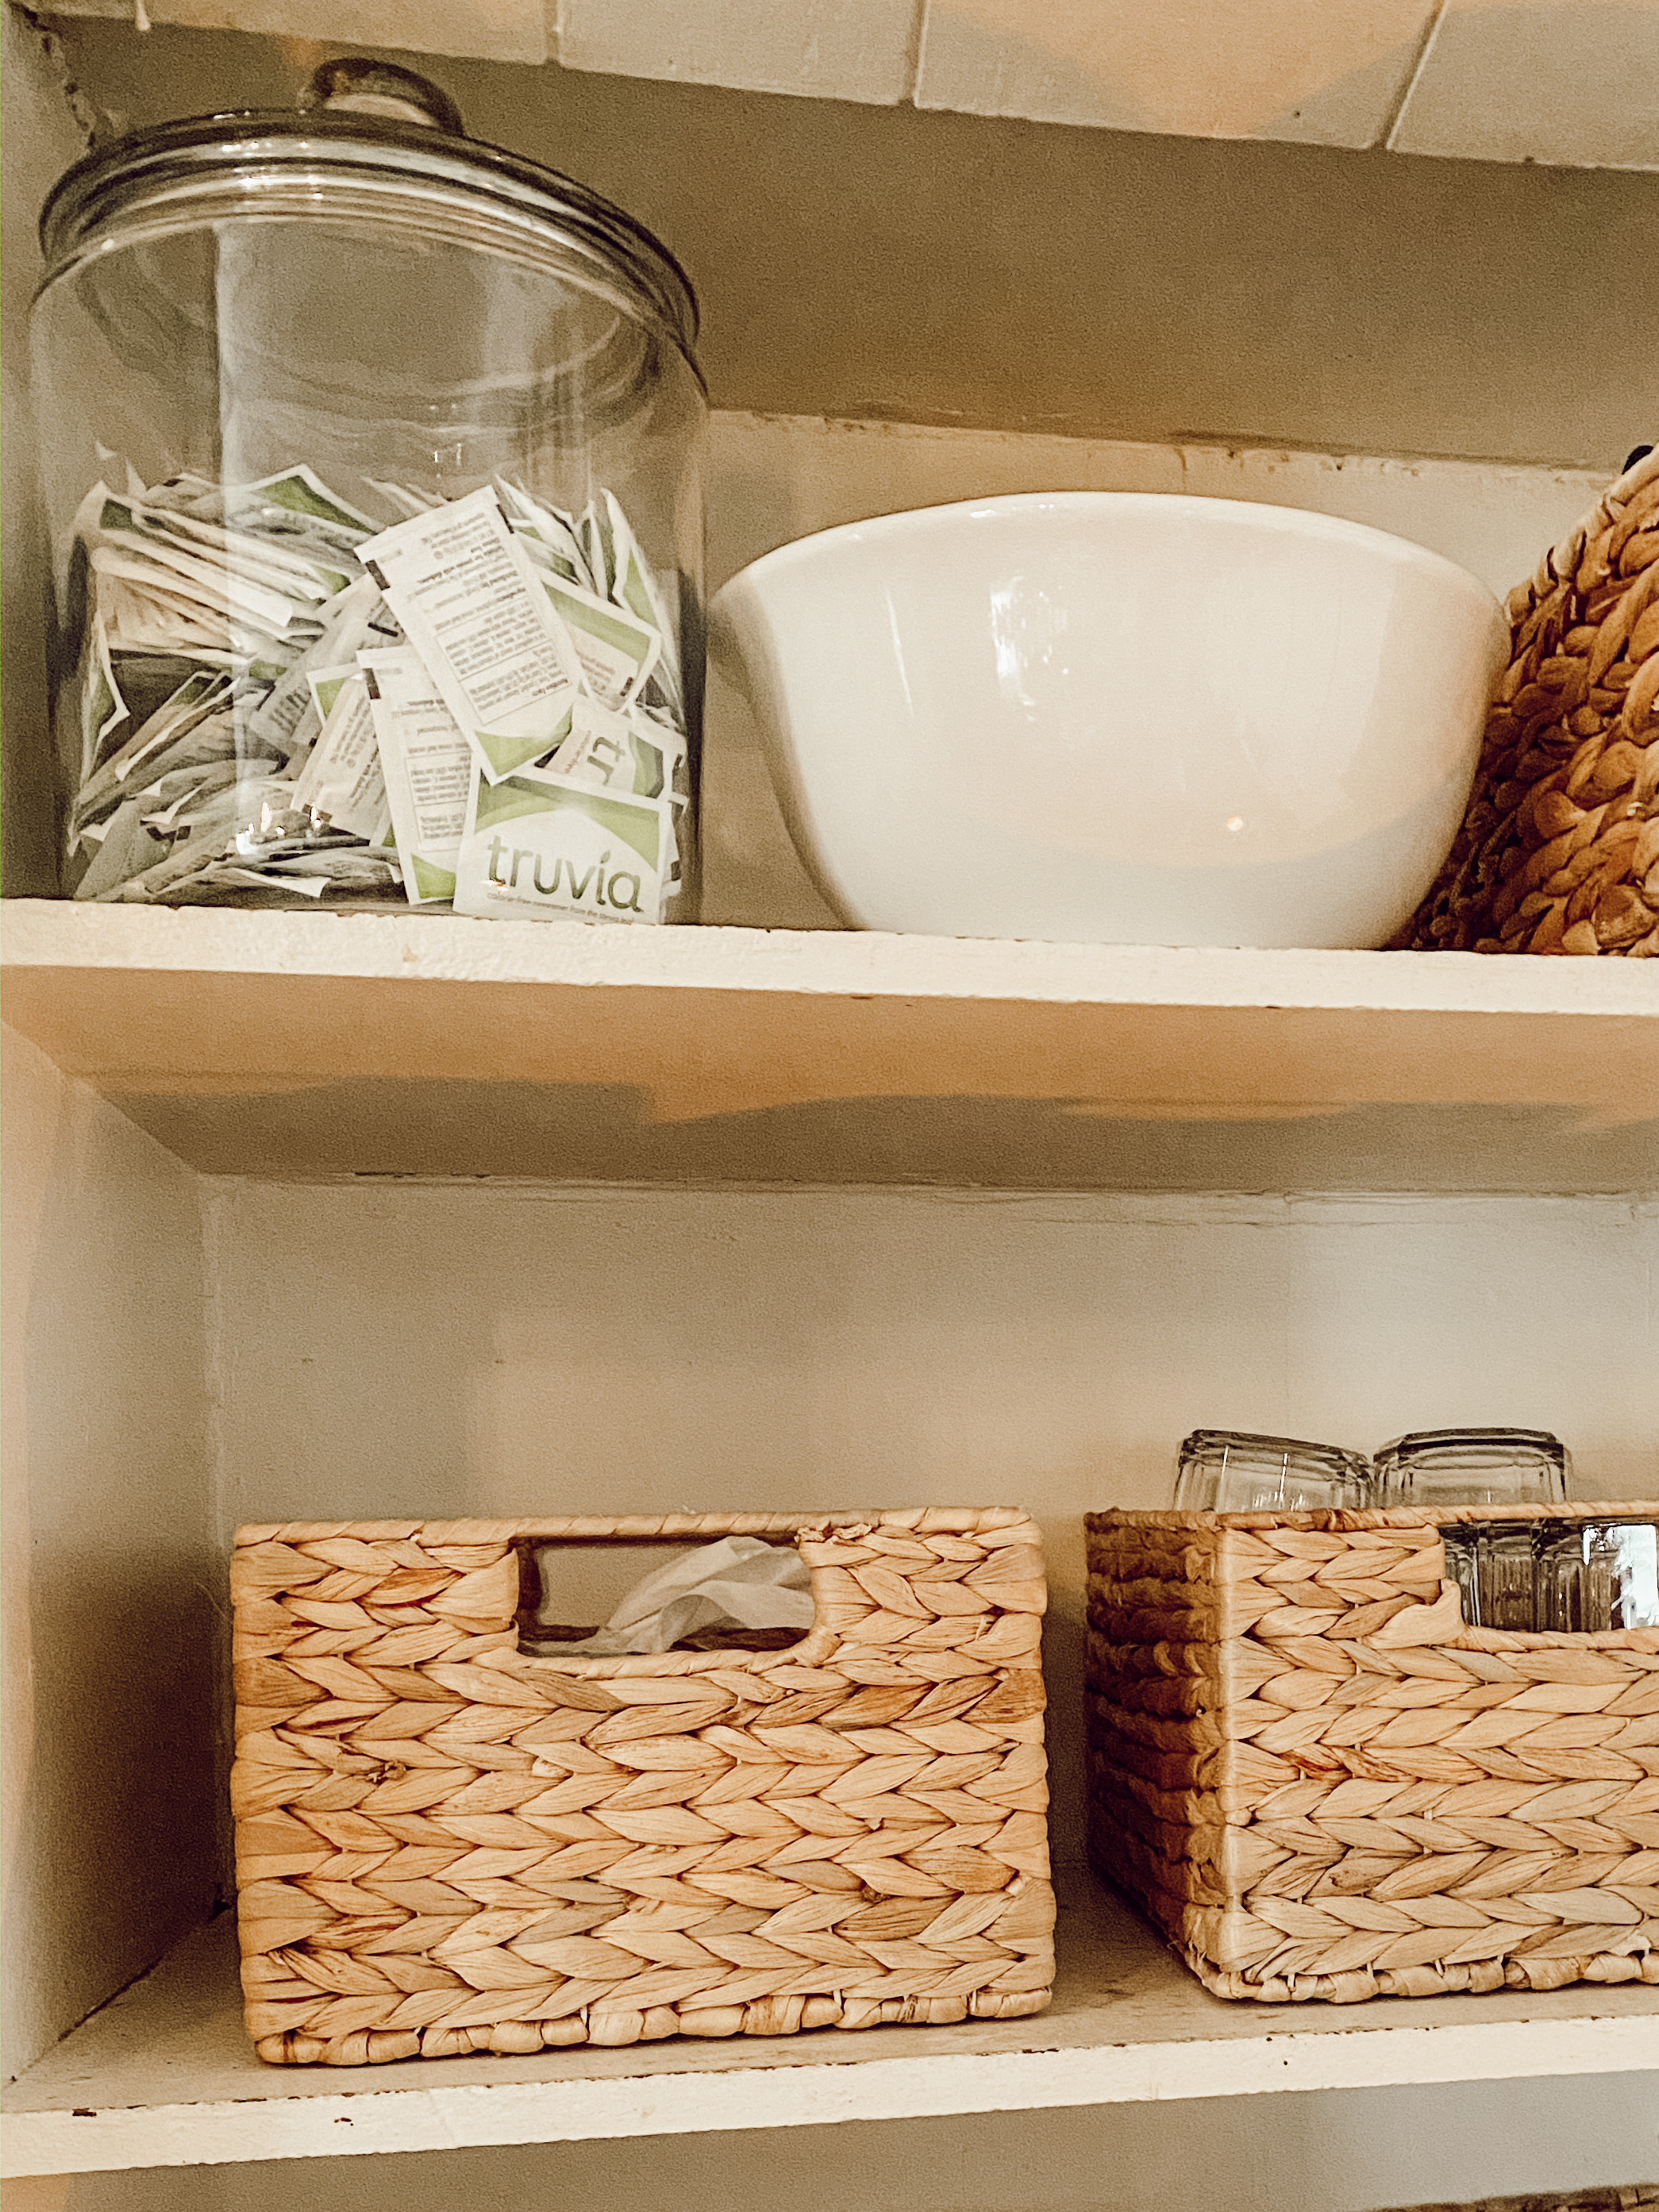 Styling Open Shelves for Organization in a Small Kitchen - Deb and Danelle